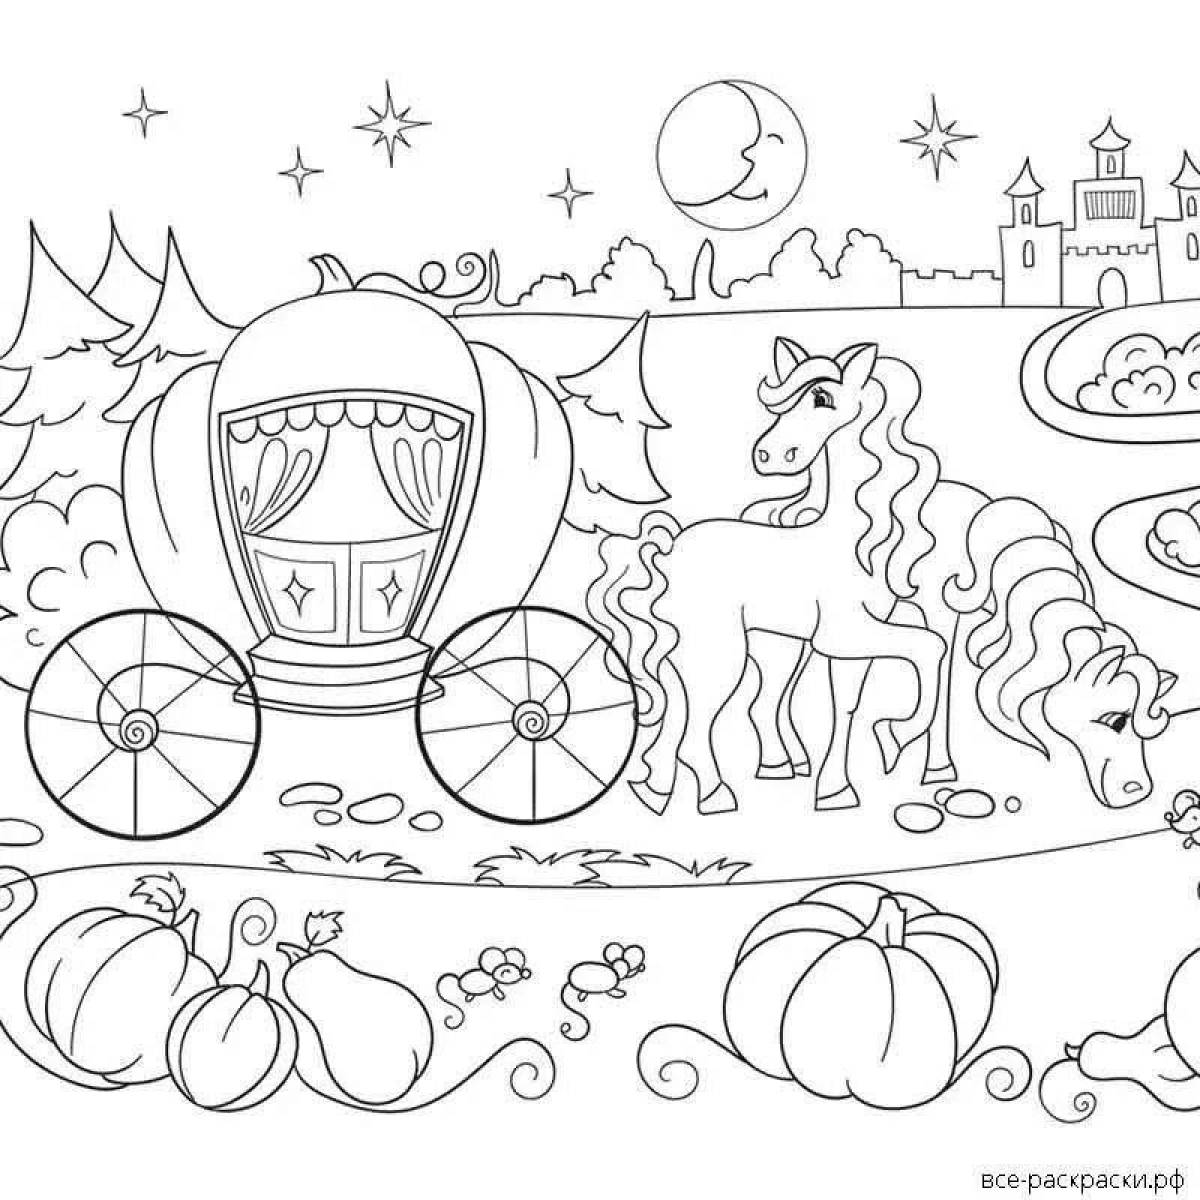 Cinderella's gorgeous carriage coloring book